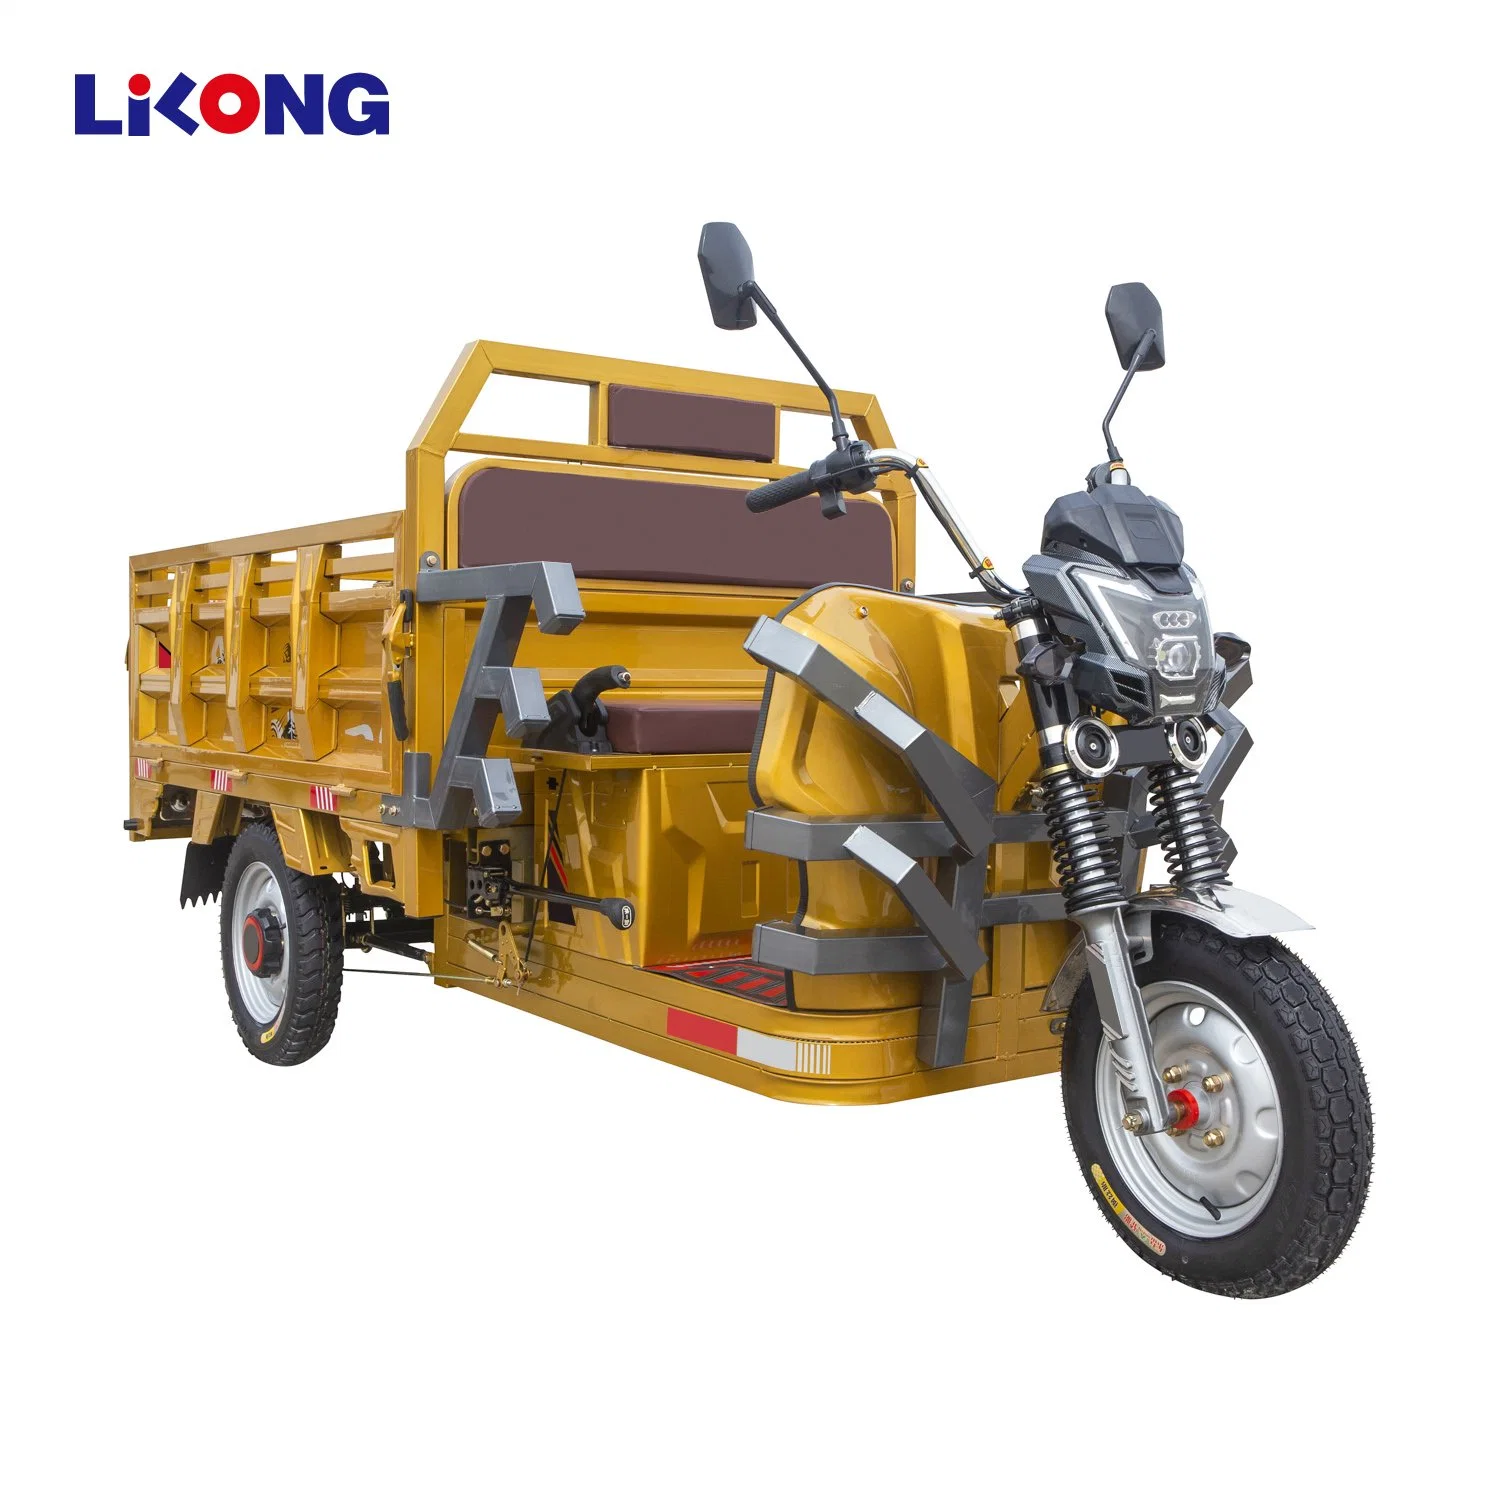 L-C06 China Electric Cargo Tricycle 3 Wheel Cargo Truck